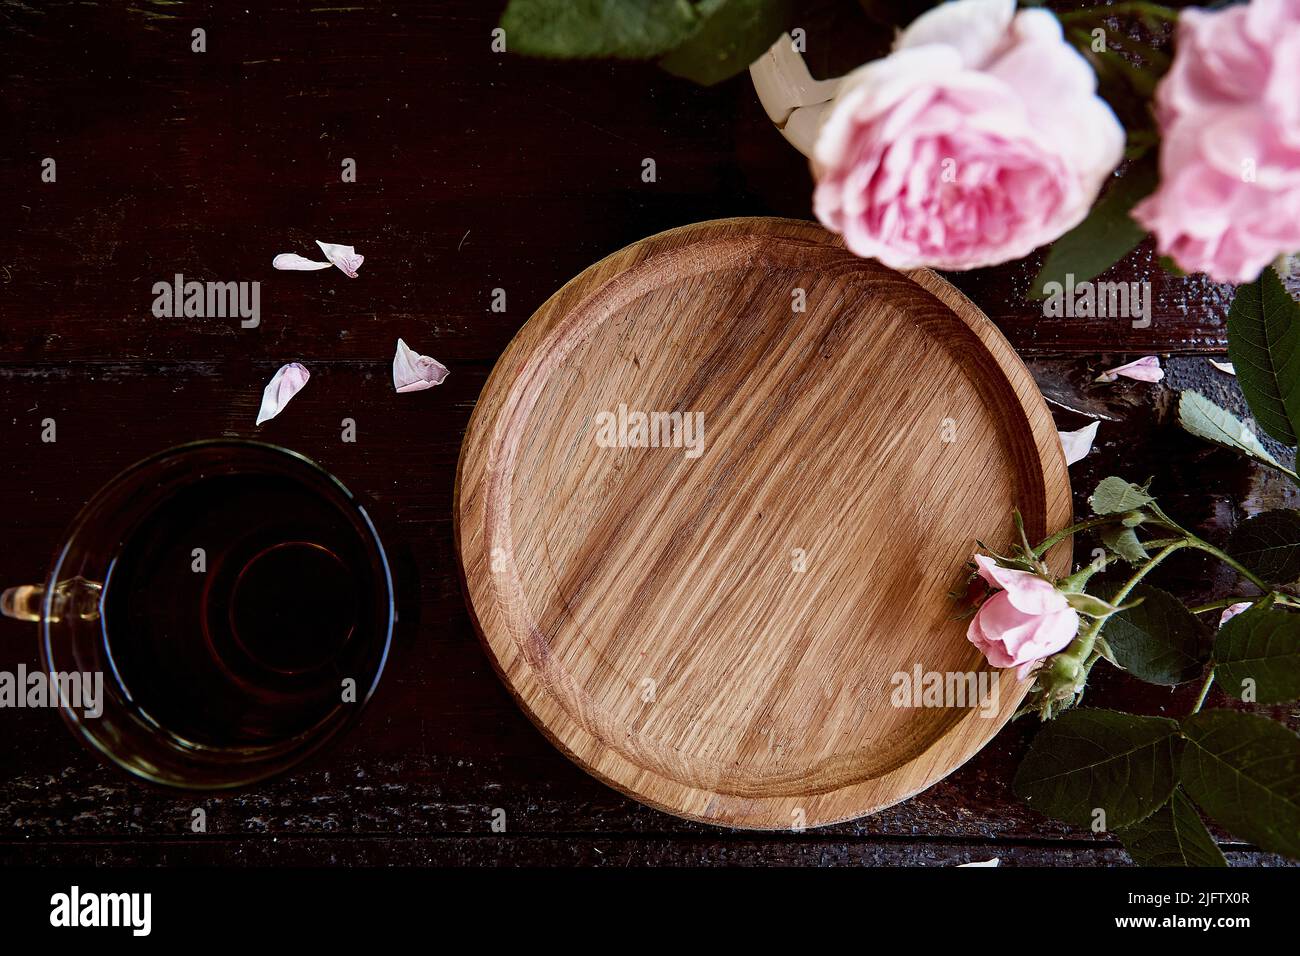 Mock up menu or recipe wooden plate, podium with pink tea rose. Morning aesthetic. Invitation, wedding, Mothers day card mockup. Place for text. View from above. Stock Photo